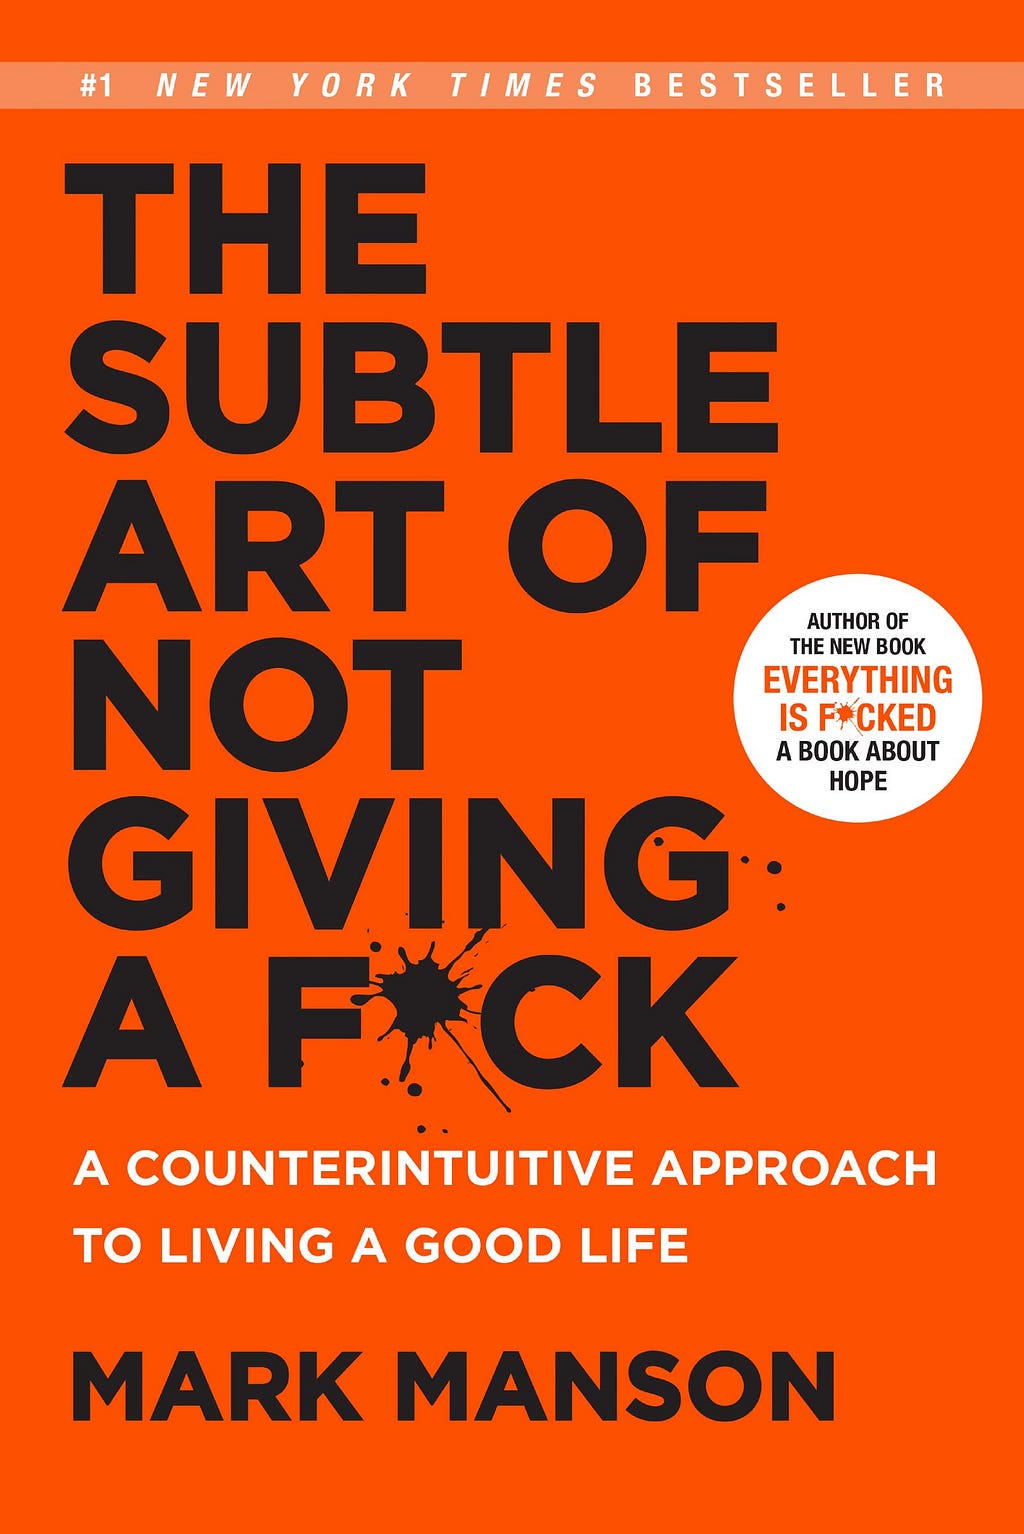 The book titled “The Subtle Art Of Not Giving A F*ck” by Mark Manson